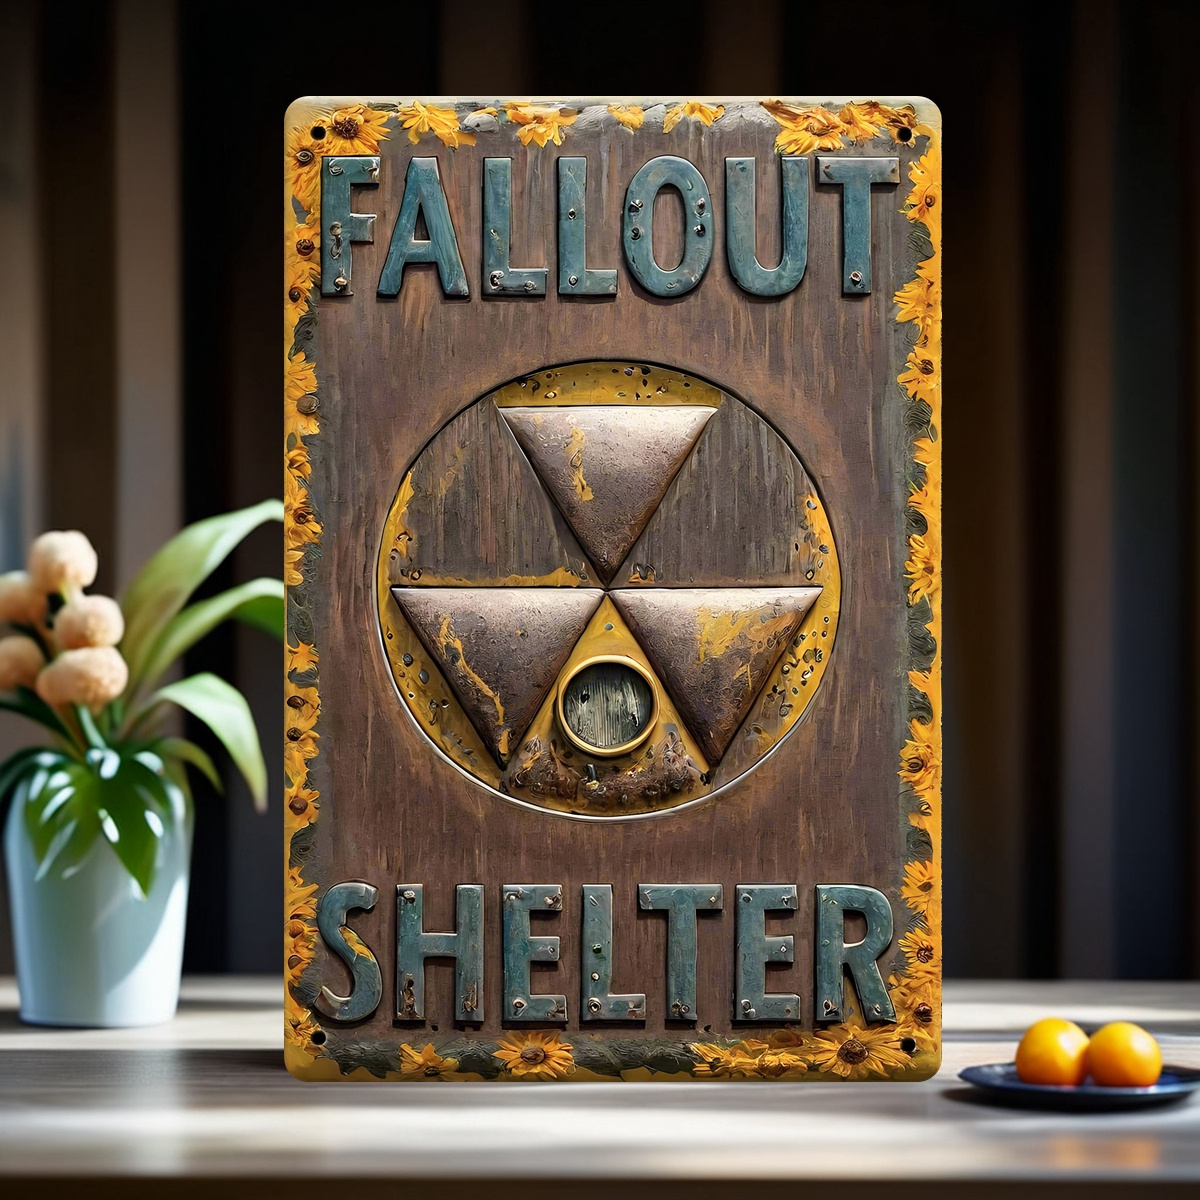 

Fallout Shelter Metal Tin Sign, 3d Visual Effect Indoor And Outdoor Wall Art Decor For Home, Bedroom, Coffee Shop, Man Cave, Bar, Office, Club, Party Room - Iron Decorative Plaque (8x12 Inches)